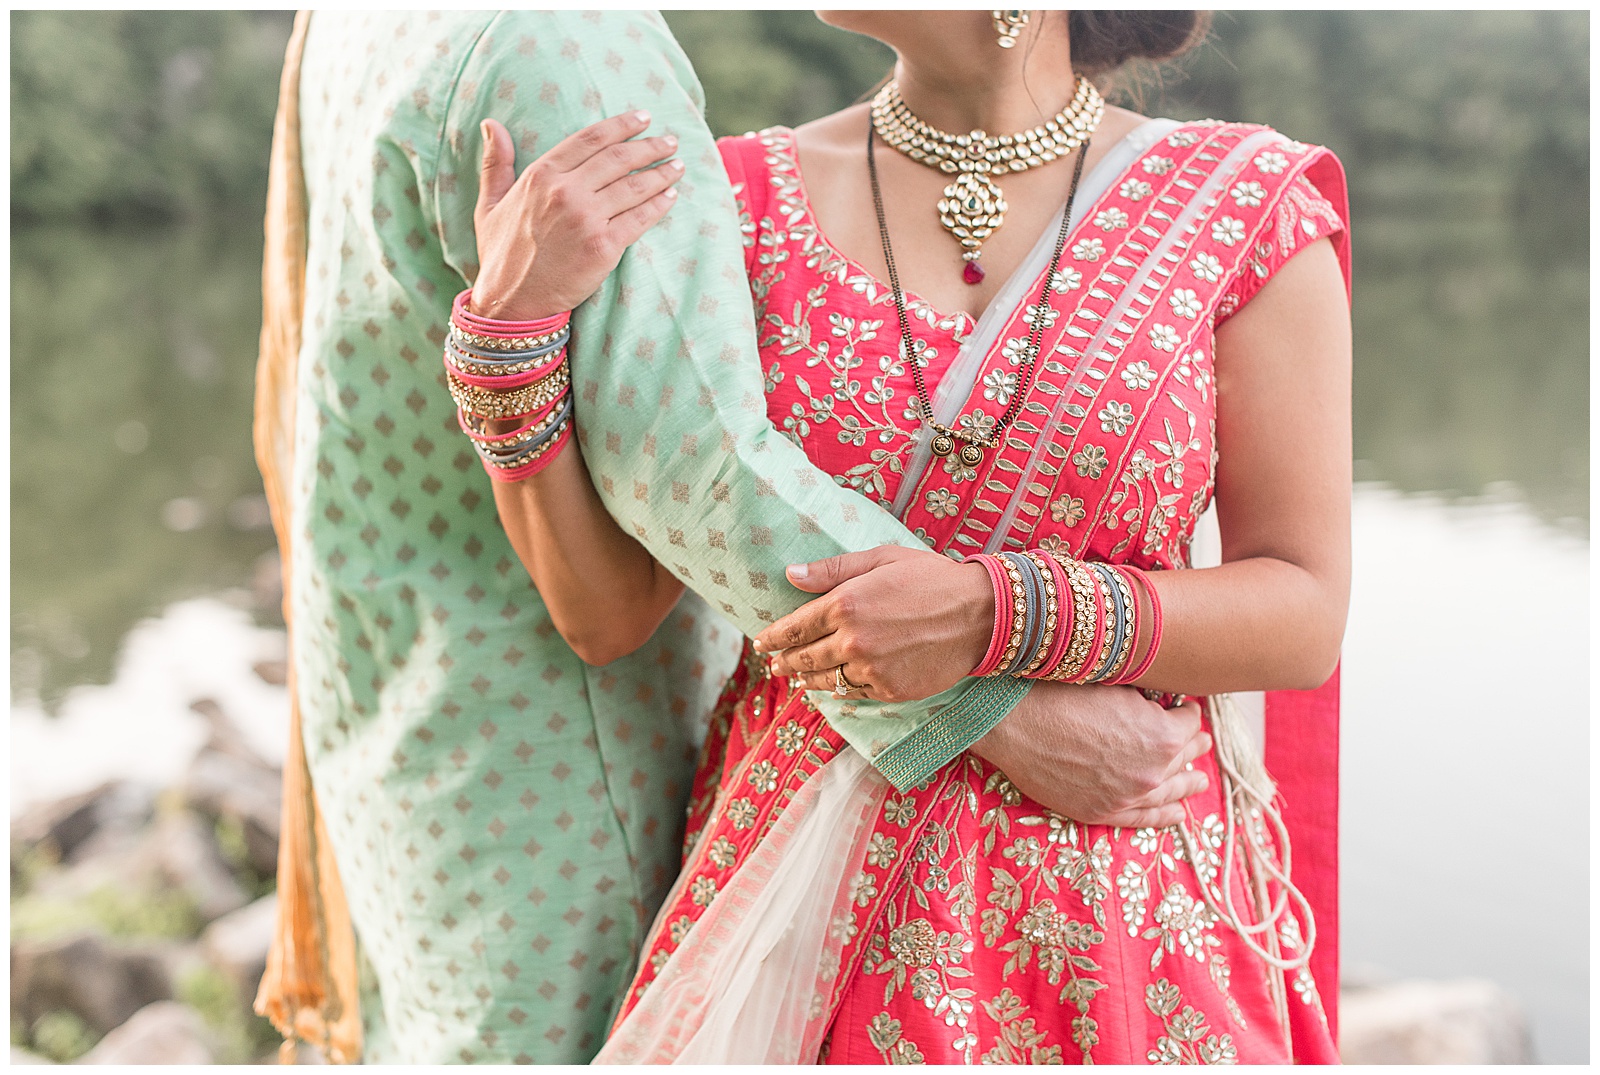 close up photo of groom and bride wearing traditional brightly colored indian wedding attire with their arms wrapped around one another with pond behind them